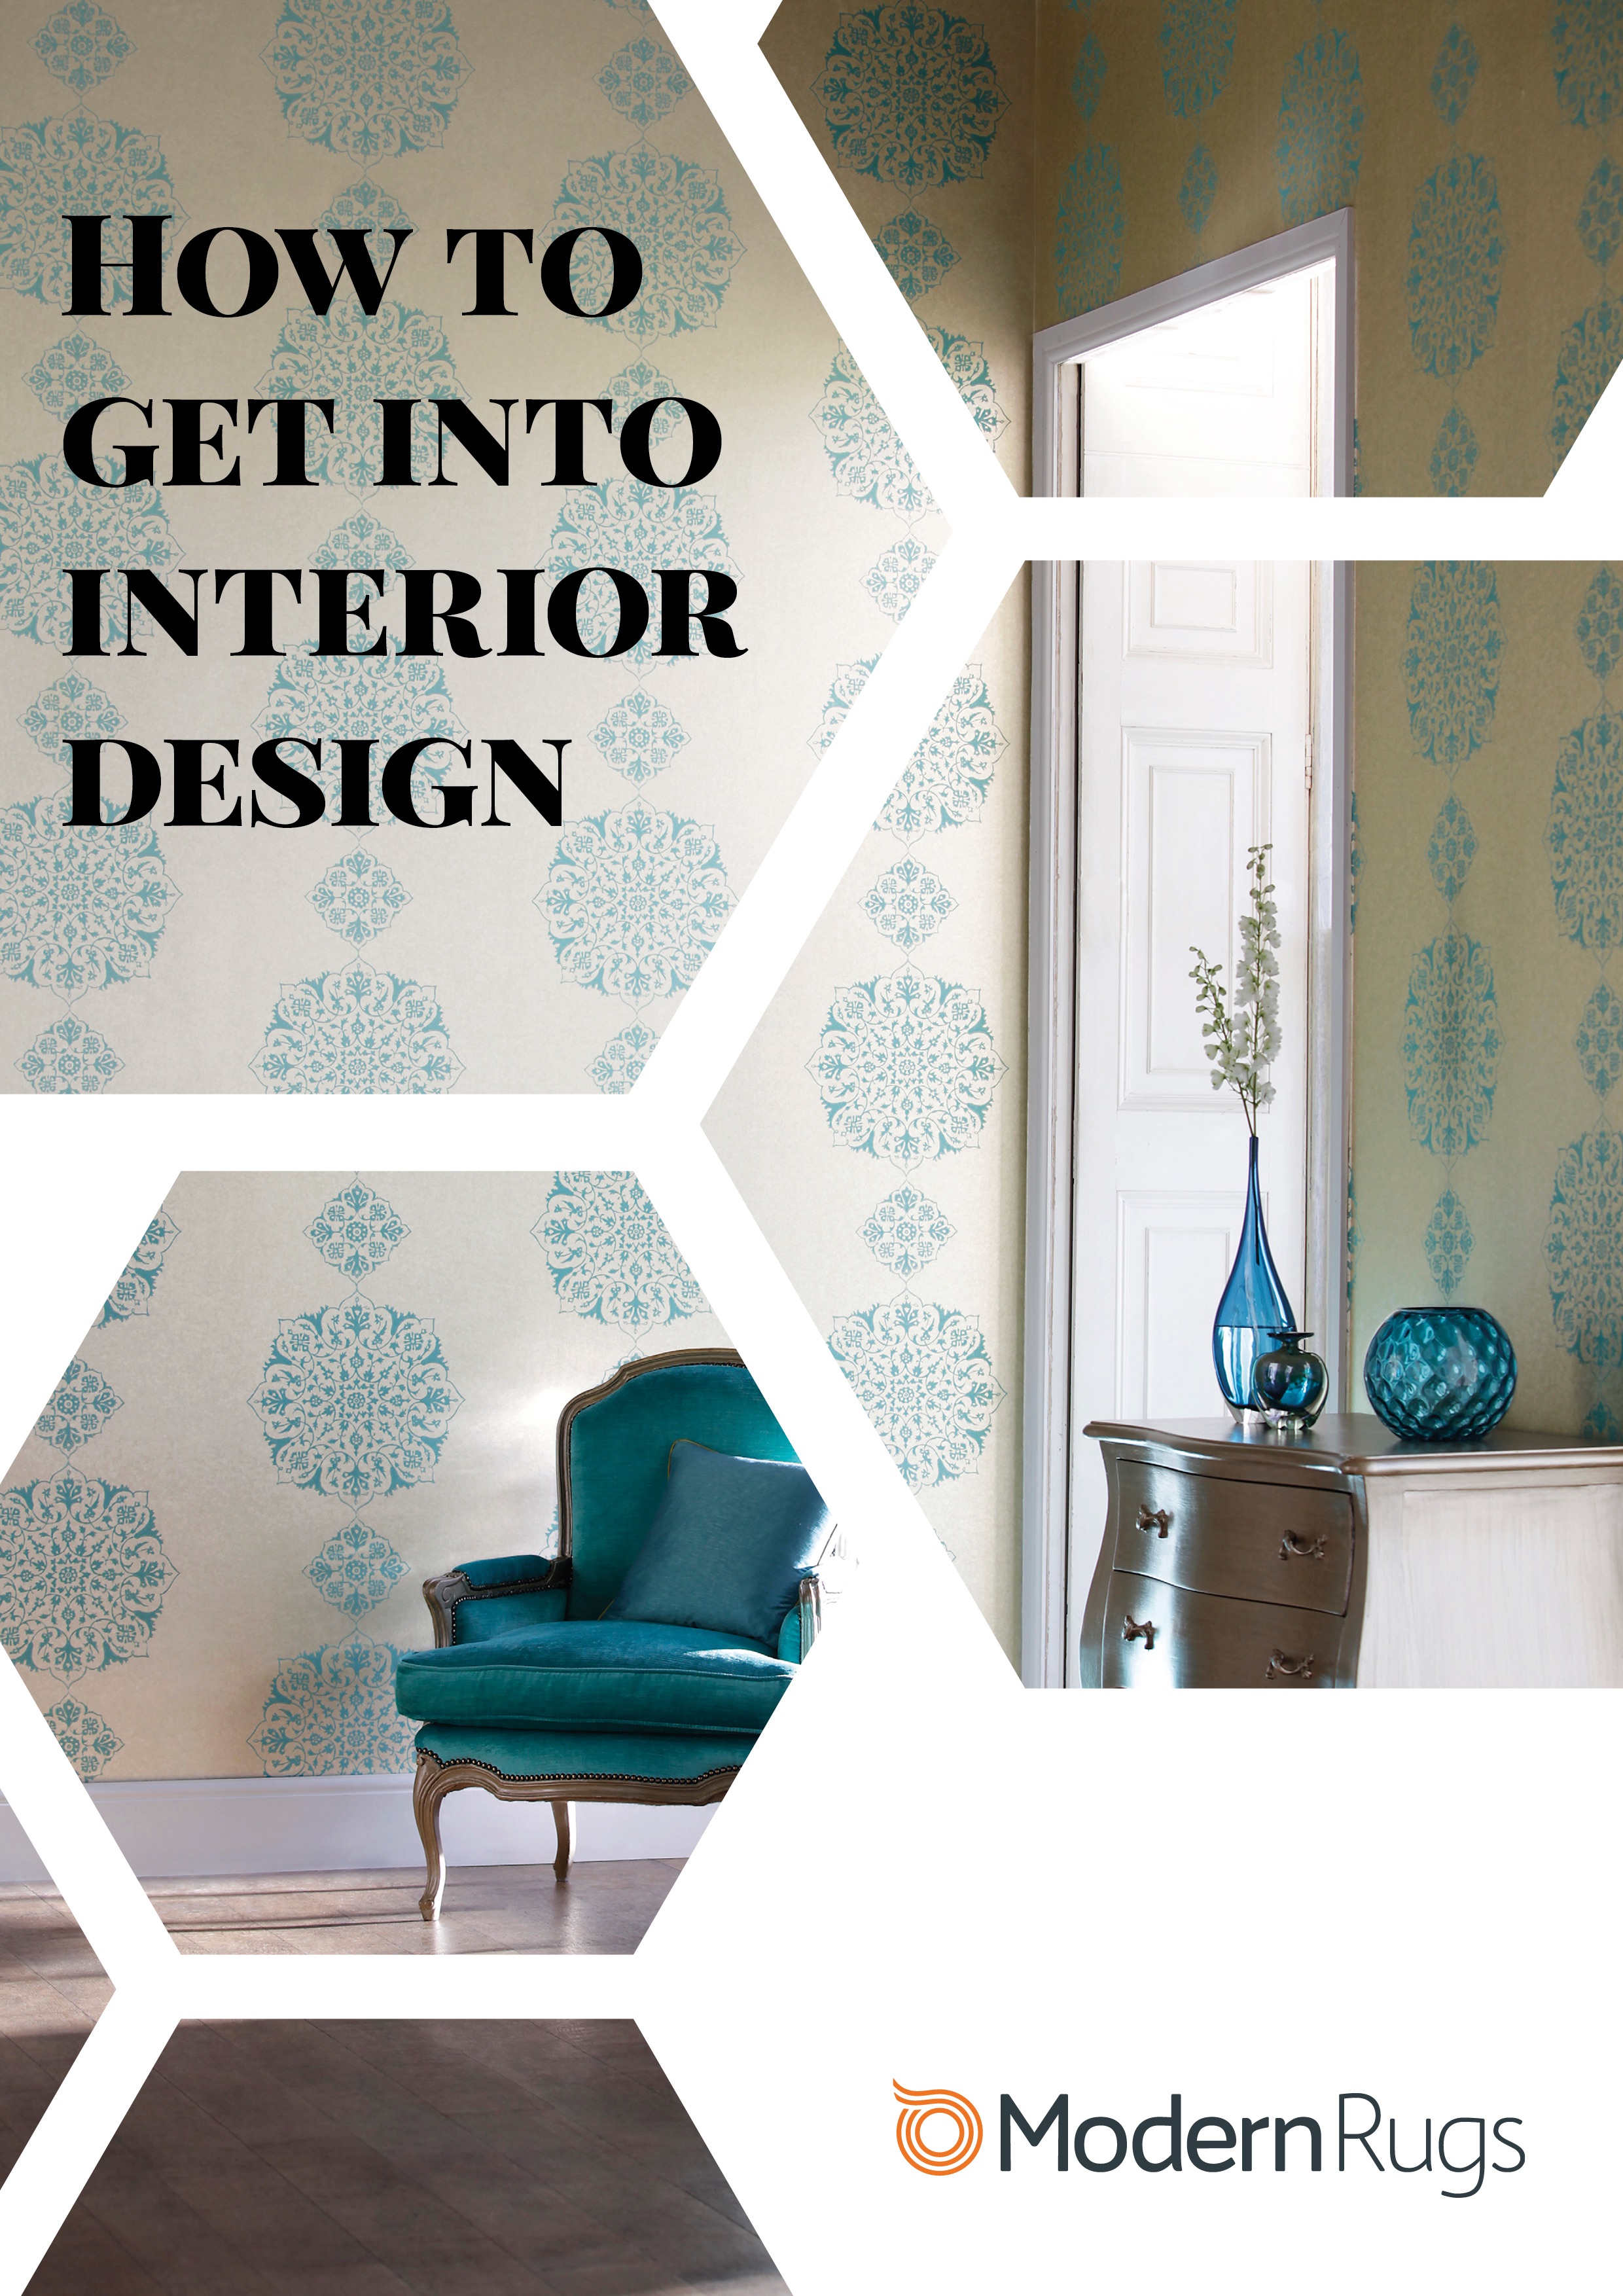 Experts Reveal Their Top Tips For Starting A Career In Interior Design Style Of The City Magazine